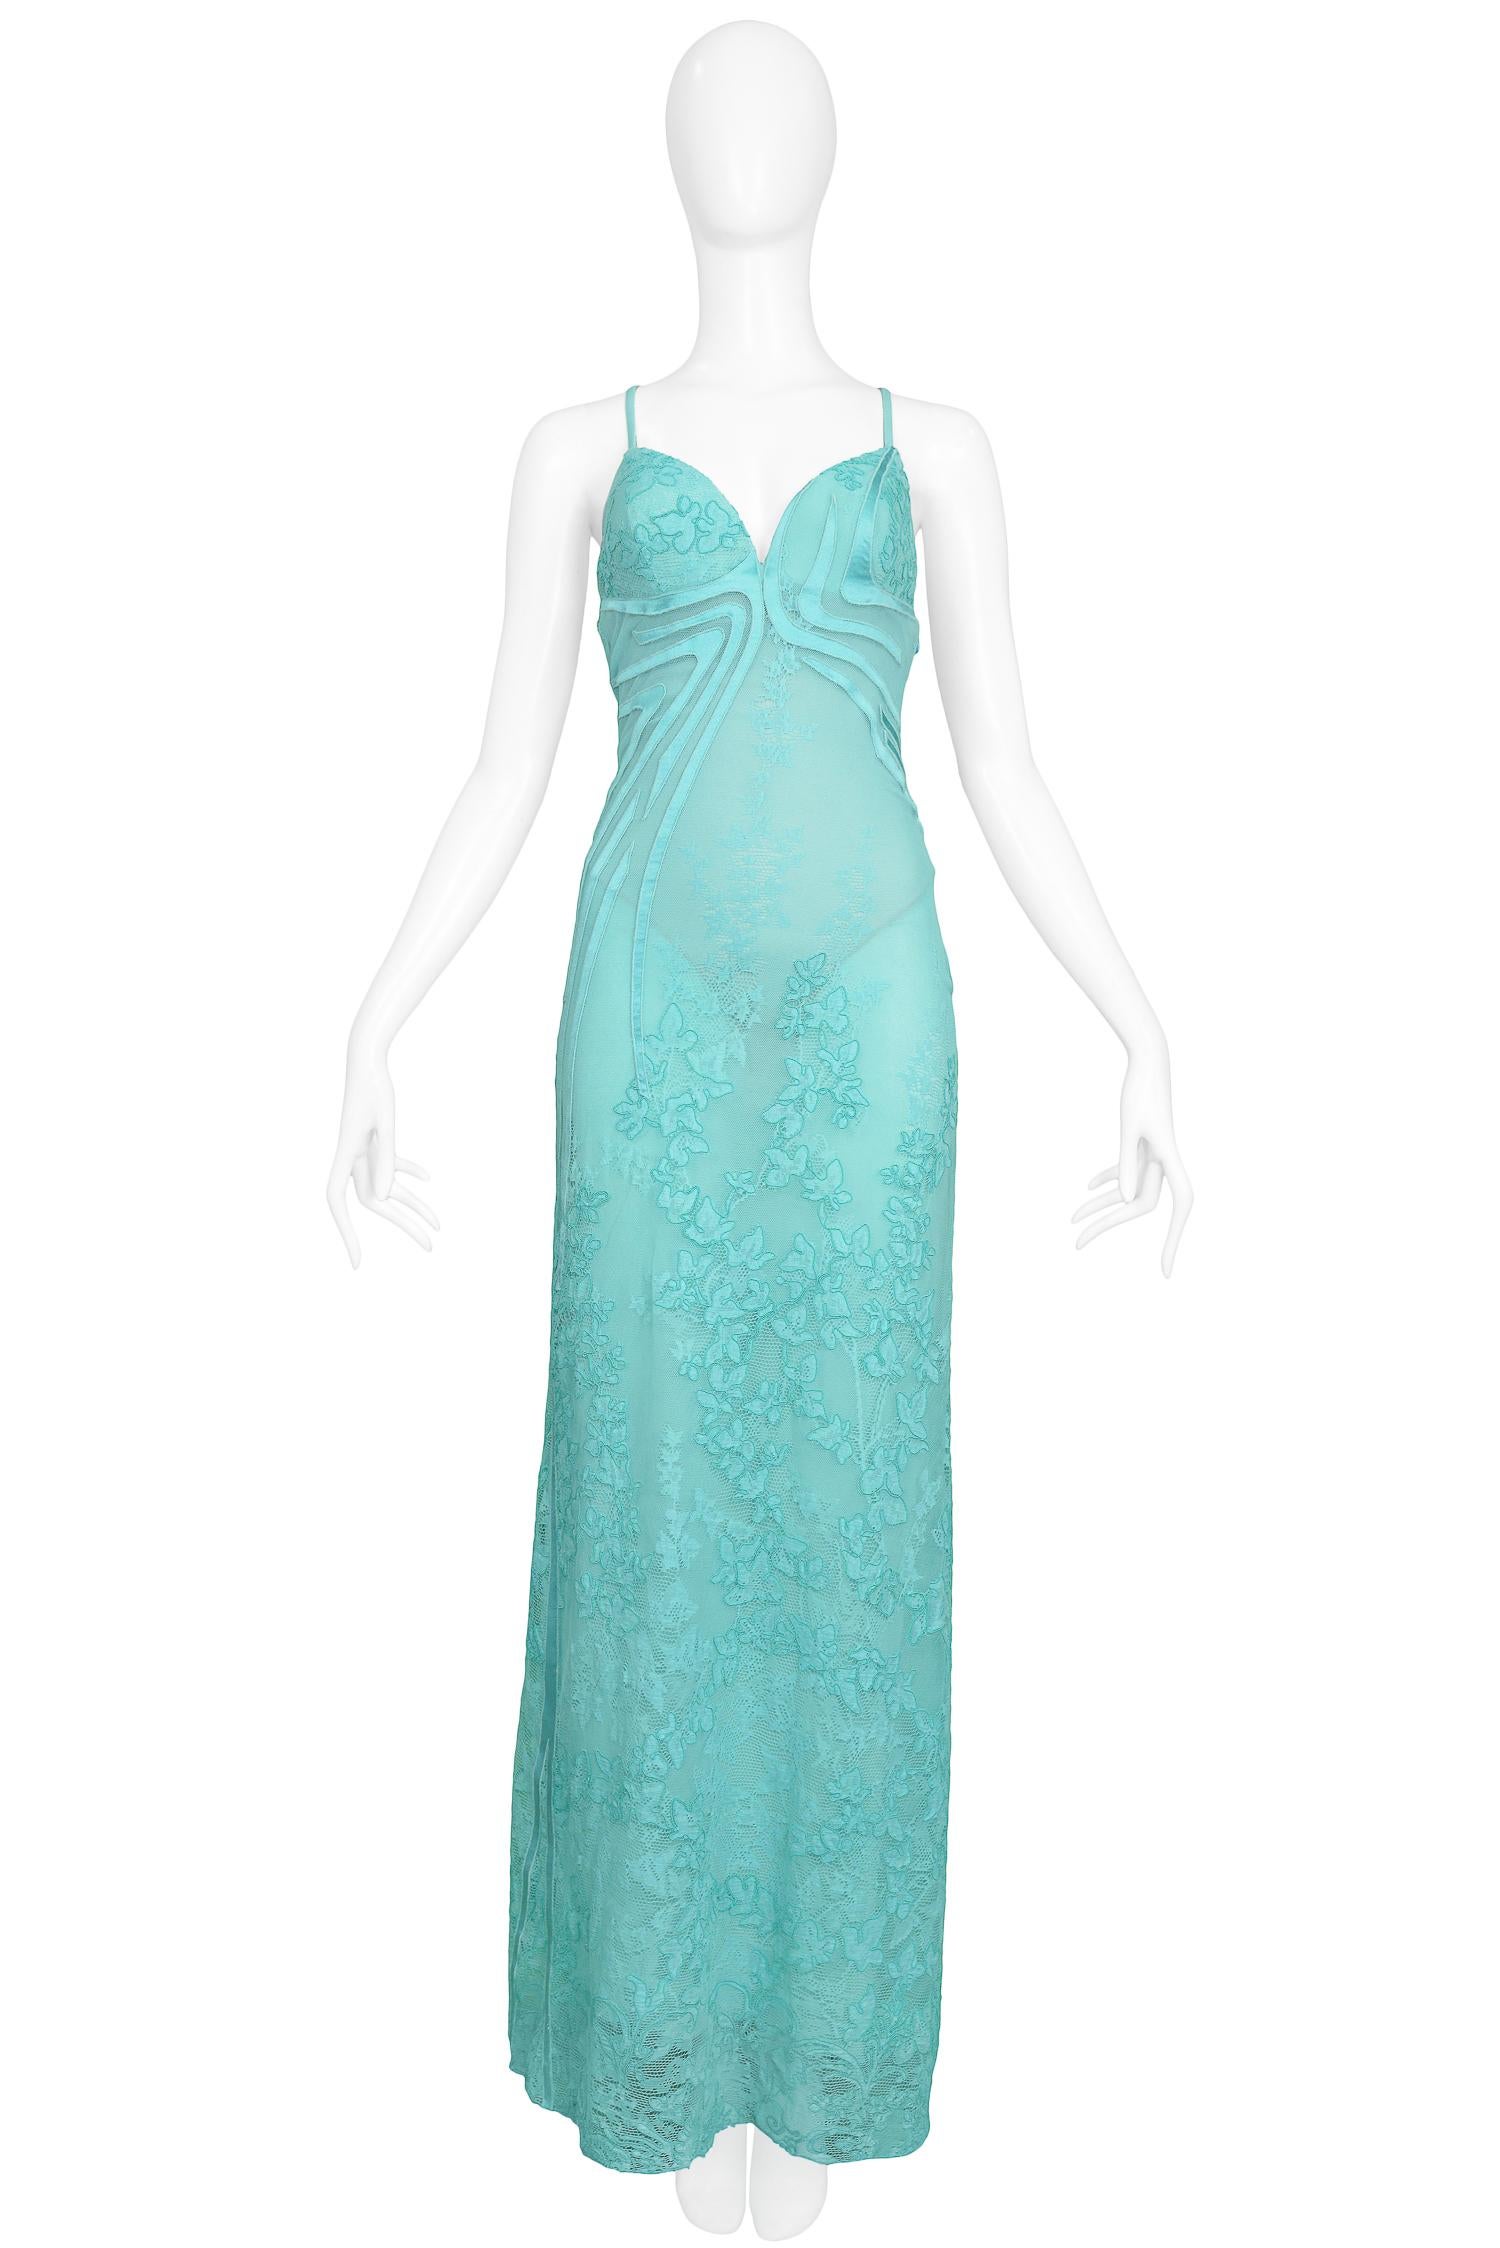 Vintage Versace seafoam green mesh & lace gown with abstract satin appliqué and delicate criss-cross straps at back. The gown features a georgette slip underlay as well as a built-in leotard and bra. Worn by Gisele on the Autumn/Winter 2000